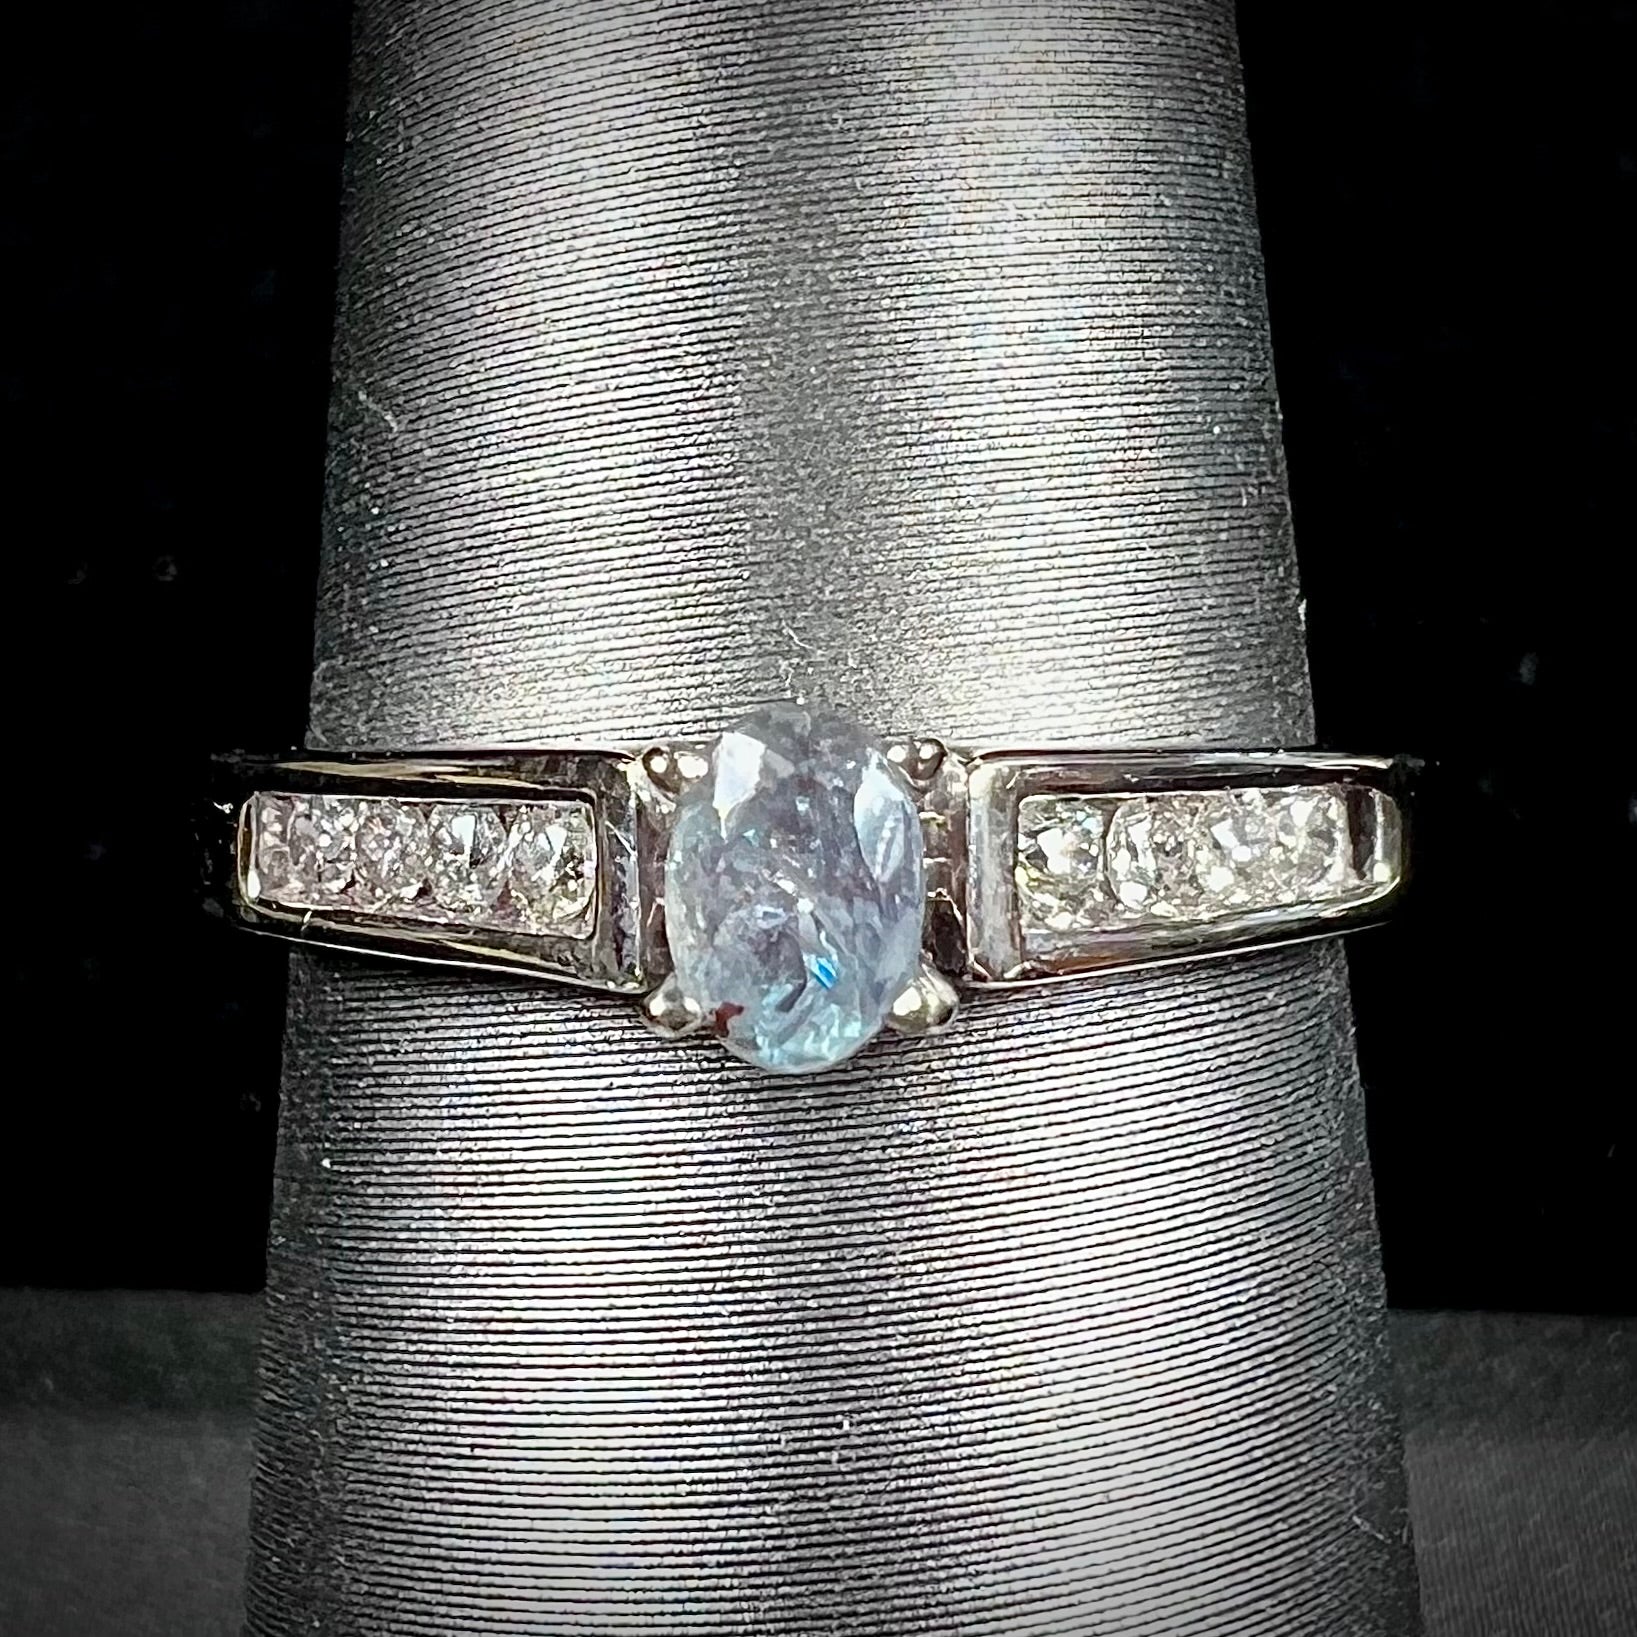 A ladies' white gold and diamond ring set with a 0.26ct alexandrite center stone that changes from green blue to lilac purple.